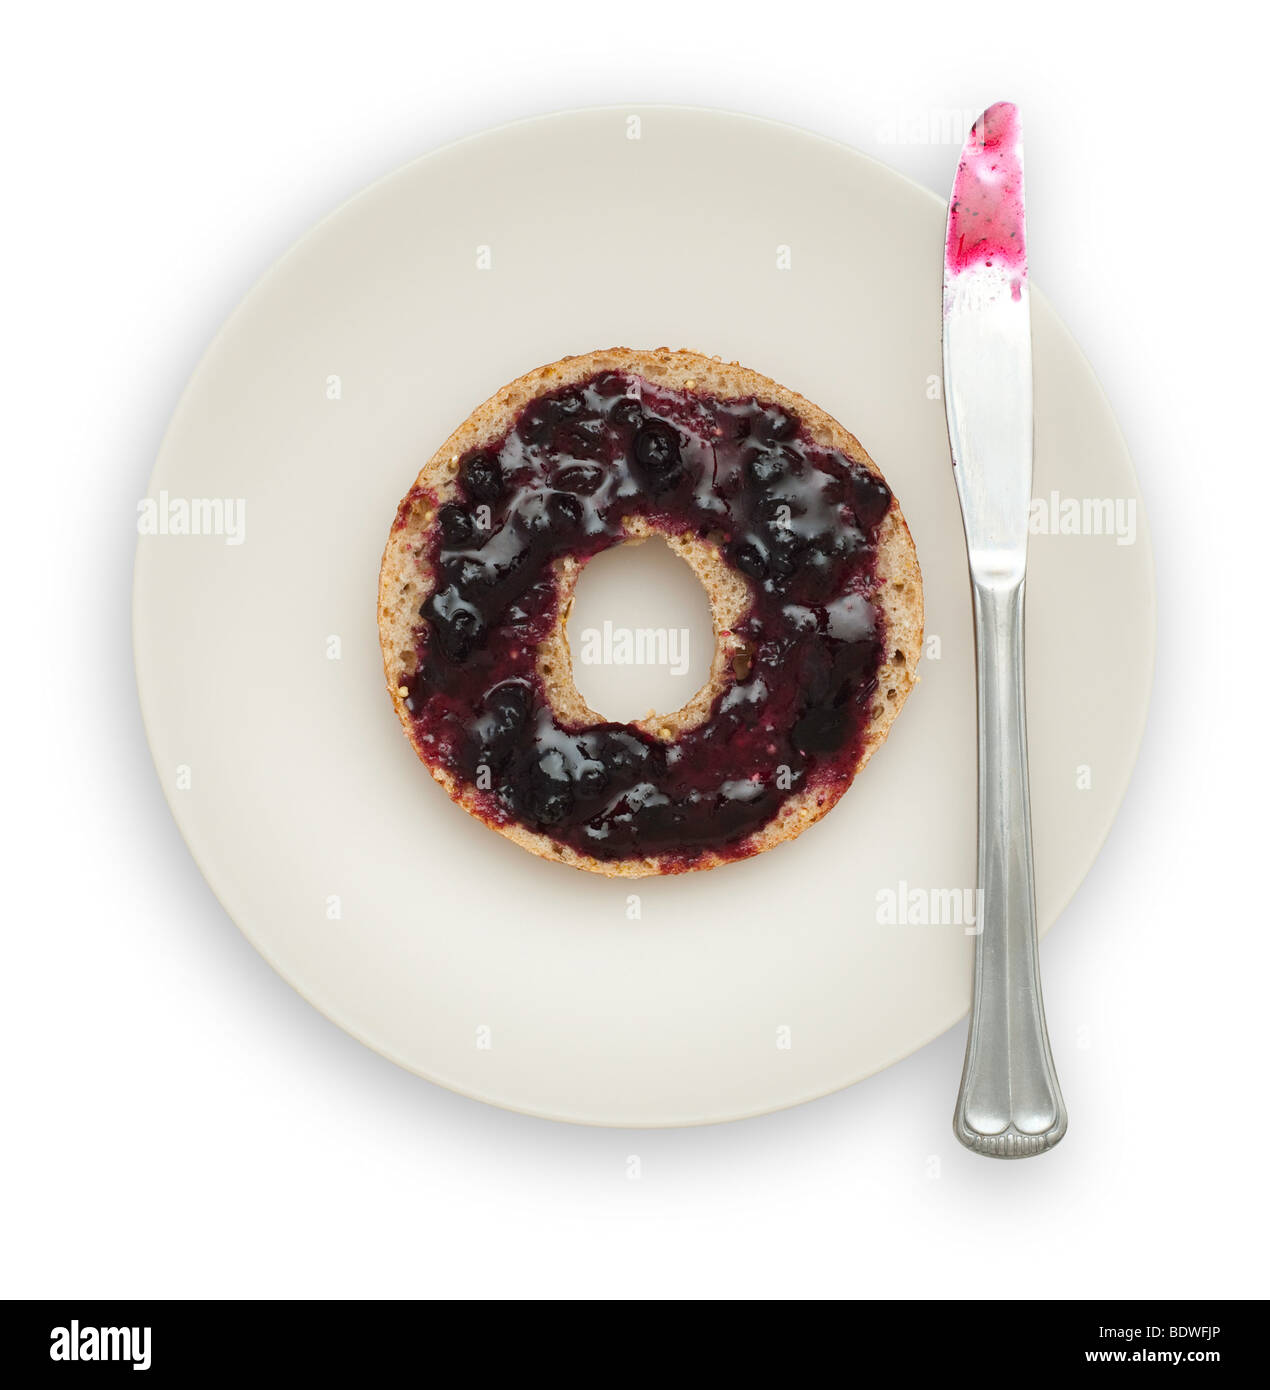 One half of a Whole Grain Bagel with Blueberry Marmalade on a white plate with a knife. Stock Photo